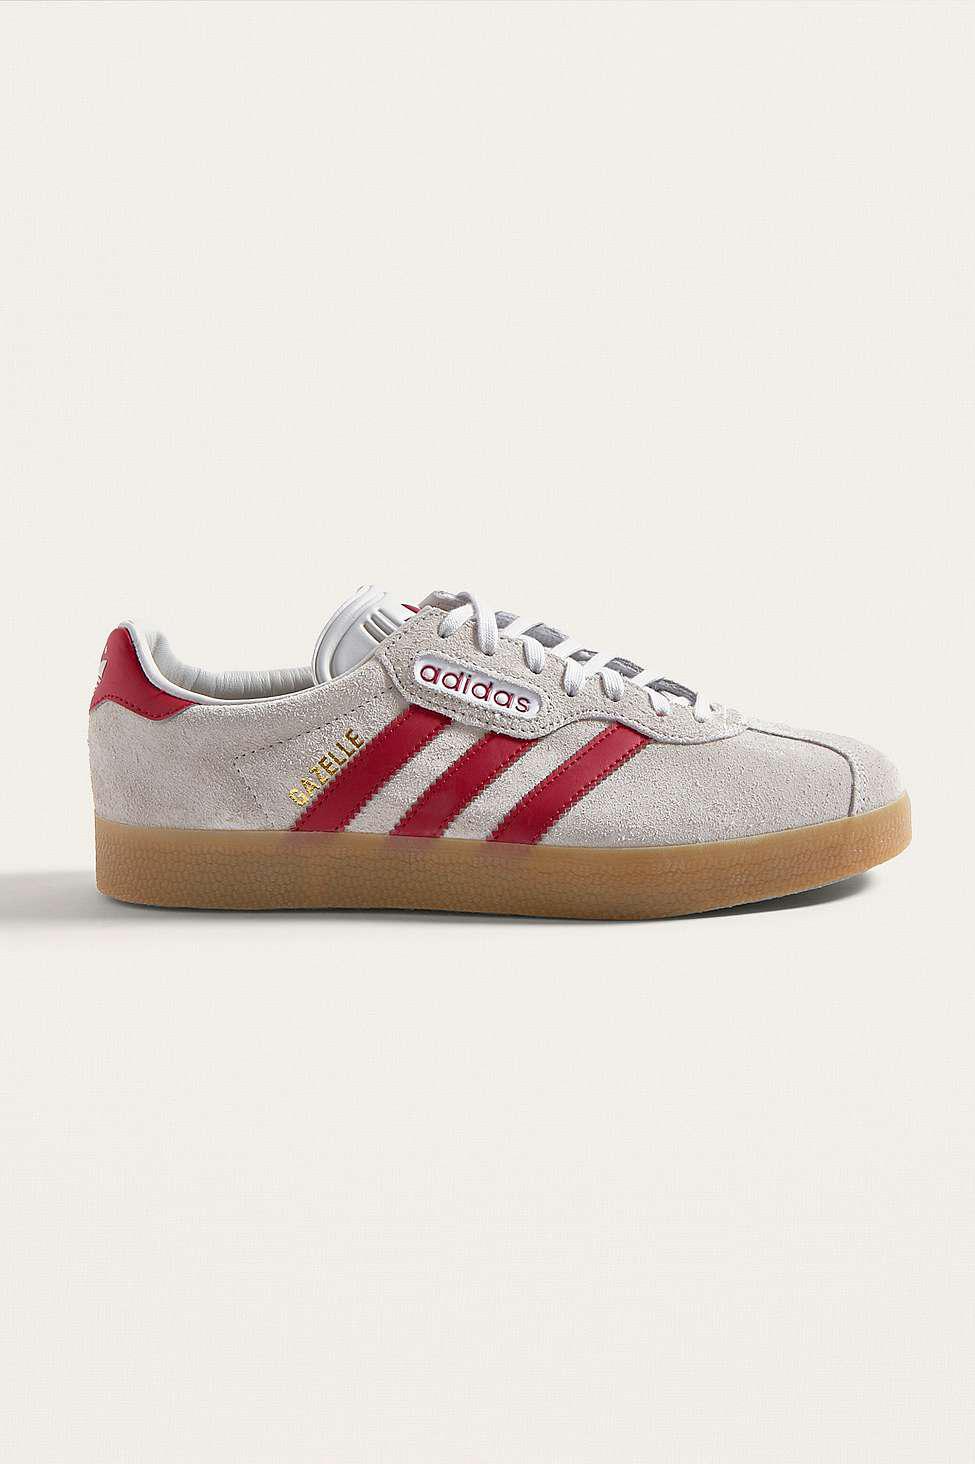 adidas Leather Gazelle Super Grey And Red Trainers in Grey for Men - Lyst